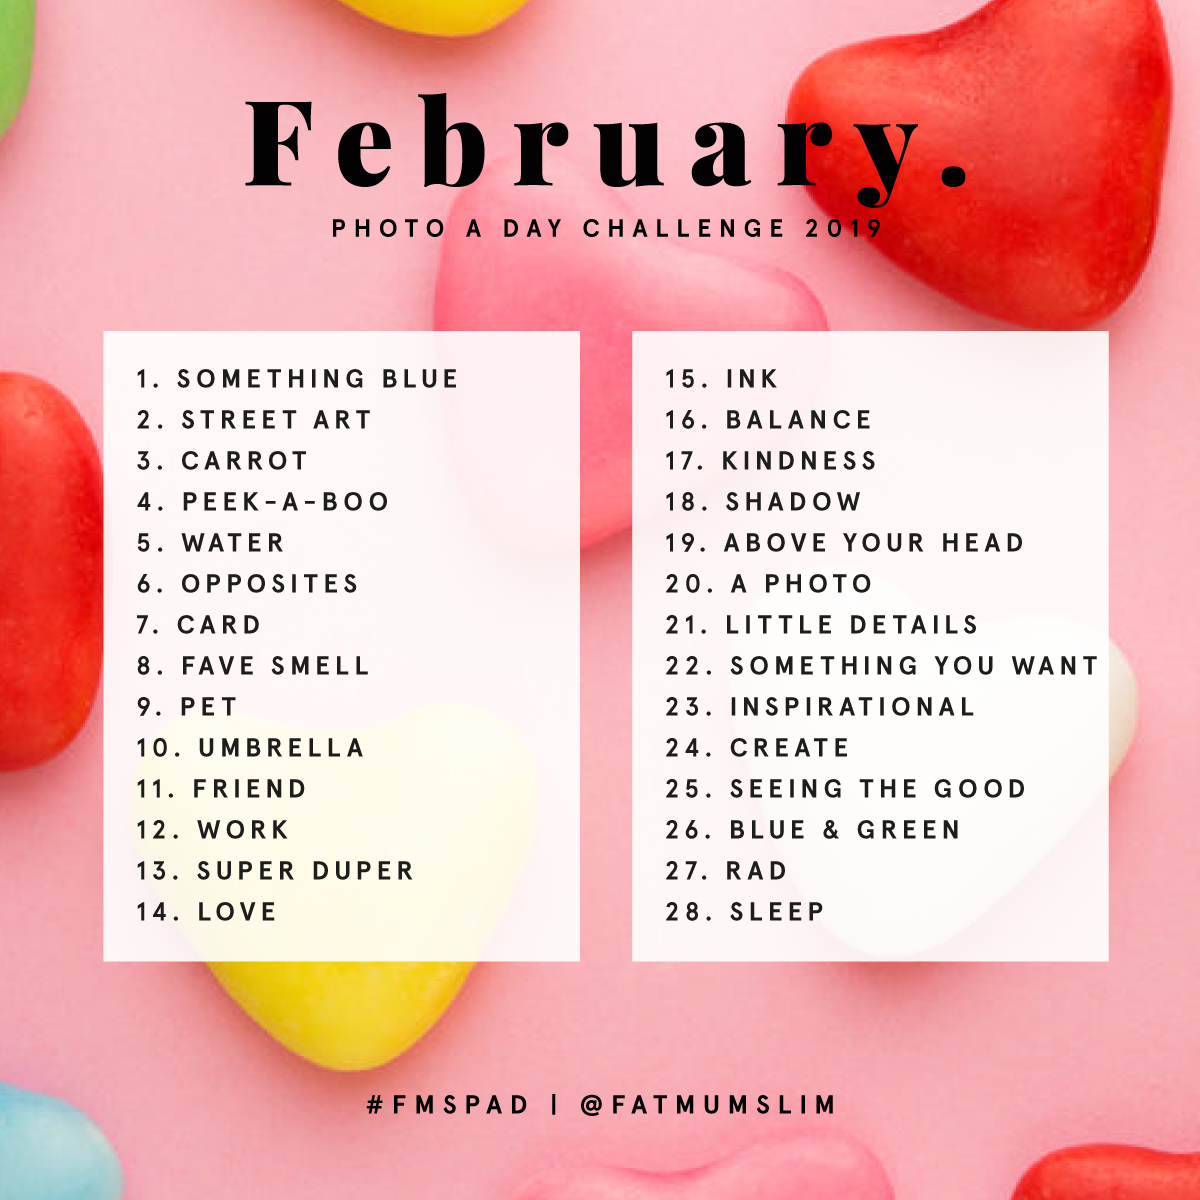 February Photo A Day Challenge 2019